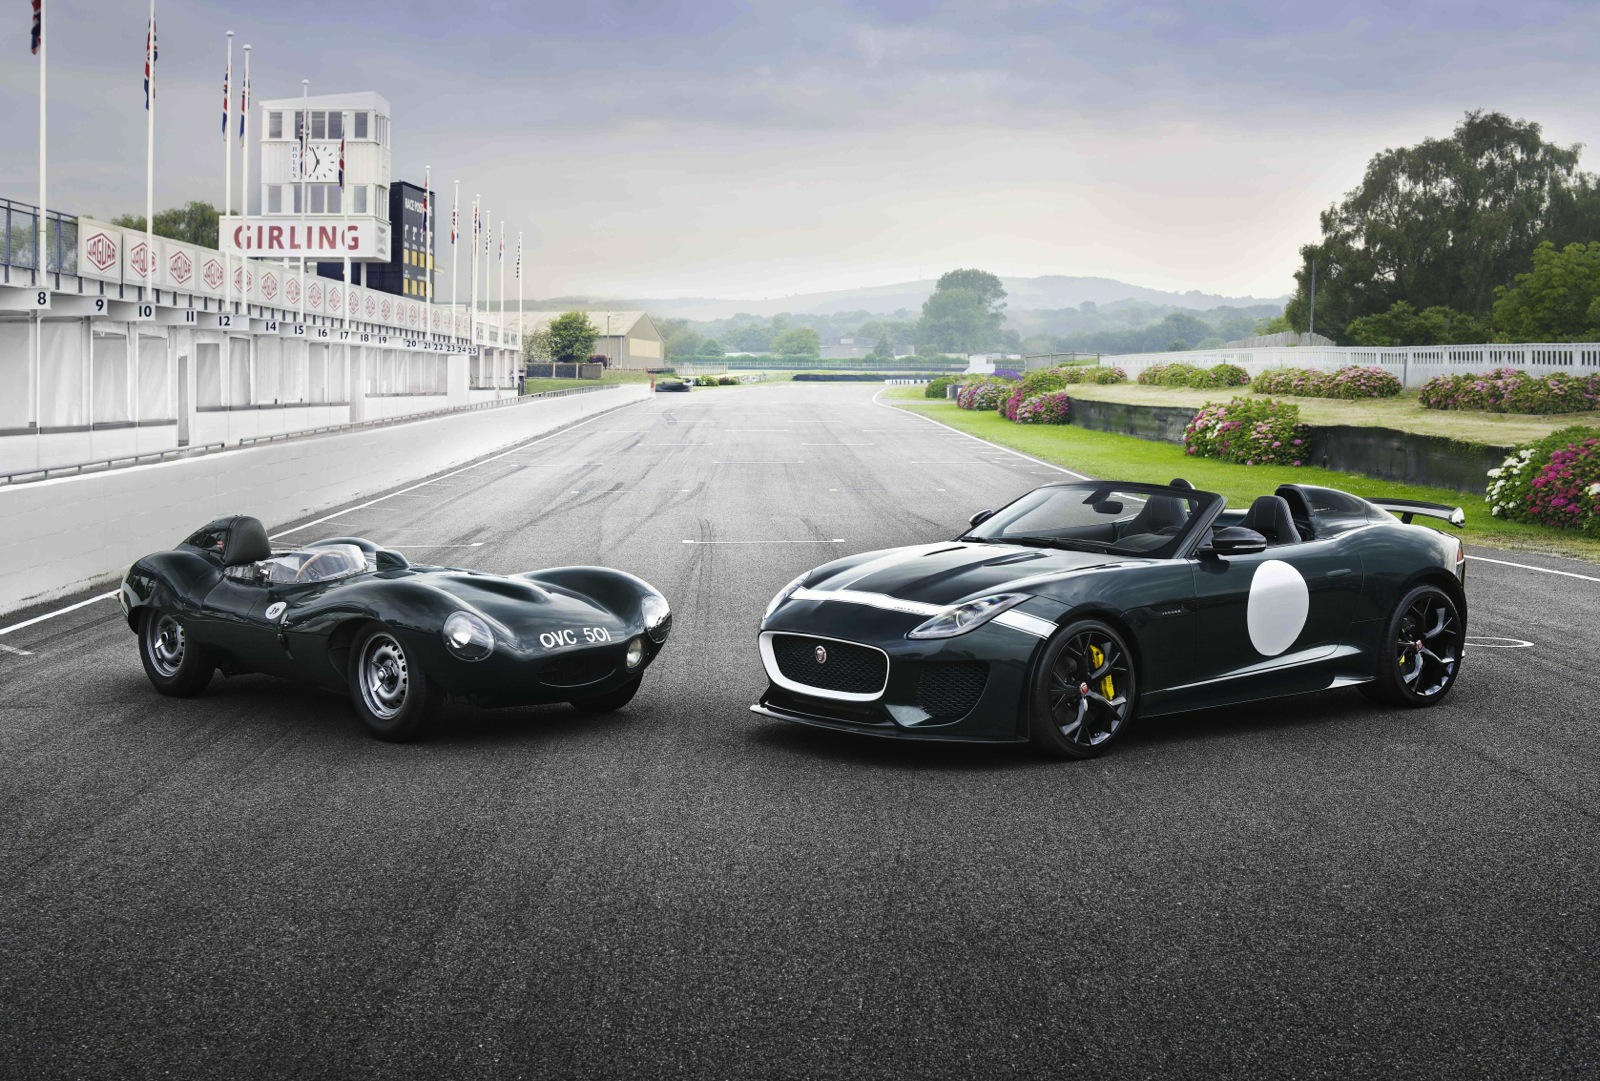 Jaguar F-Type Project 7 with classic D-Type